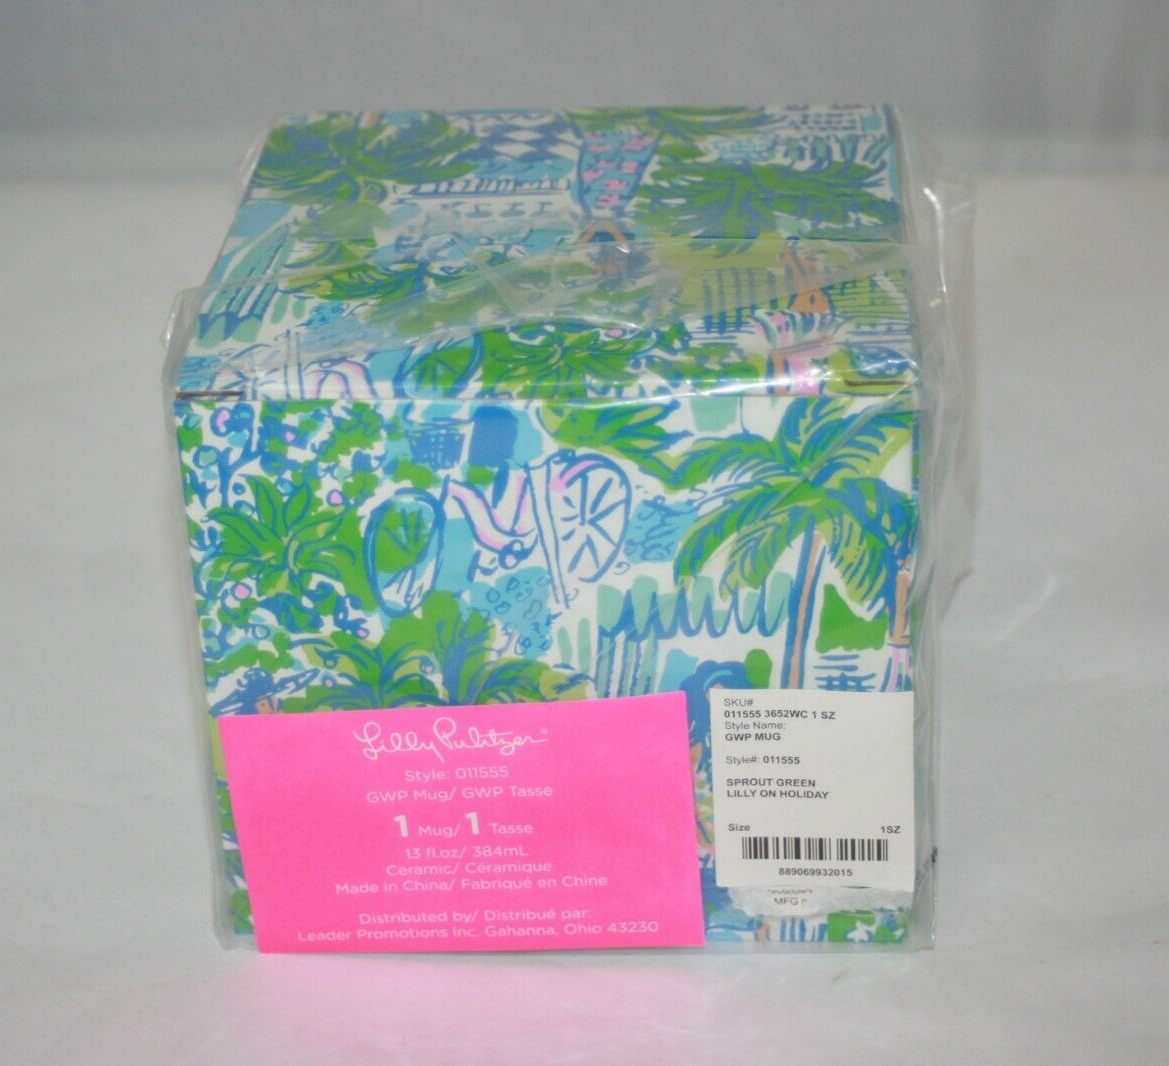 Lilly Pulitzer Sprout Green Lilly on Holiday GWP Mug Let\'s Flamingle 011555 NWT